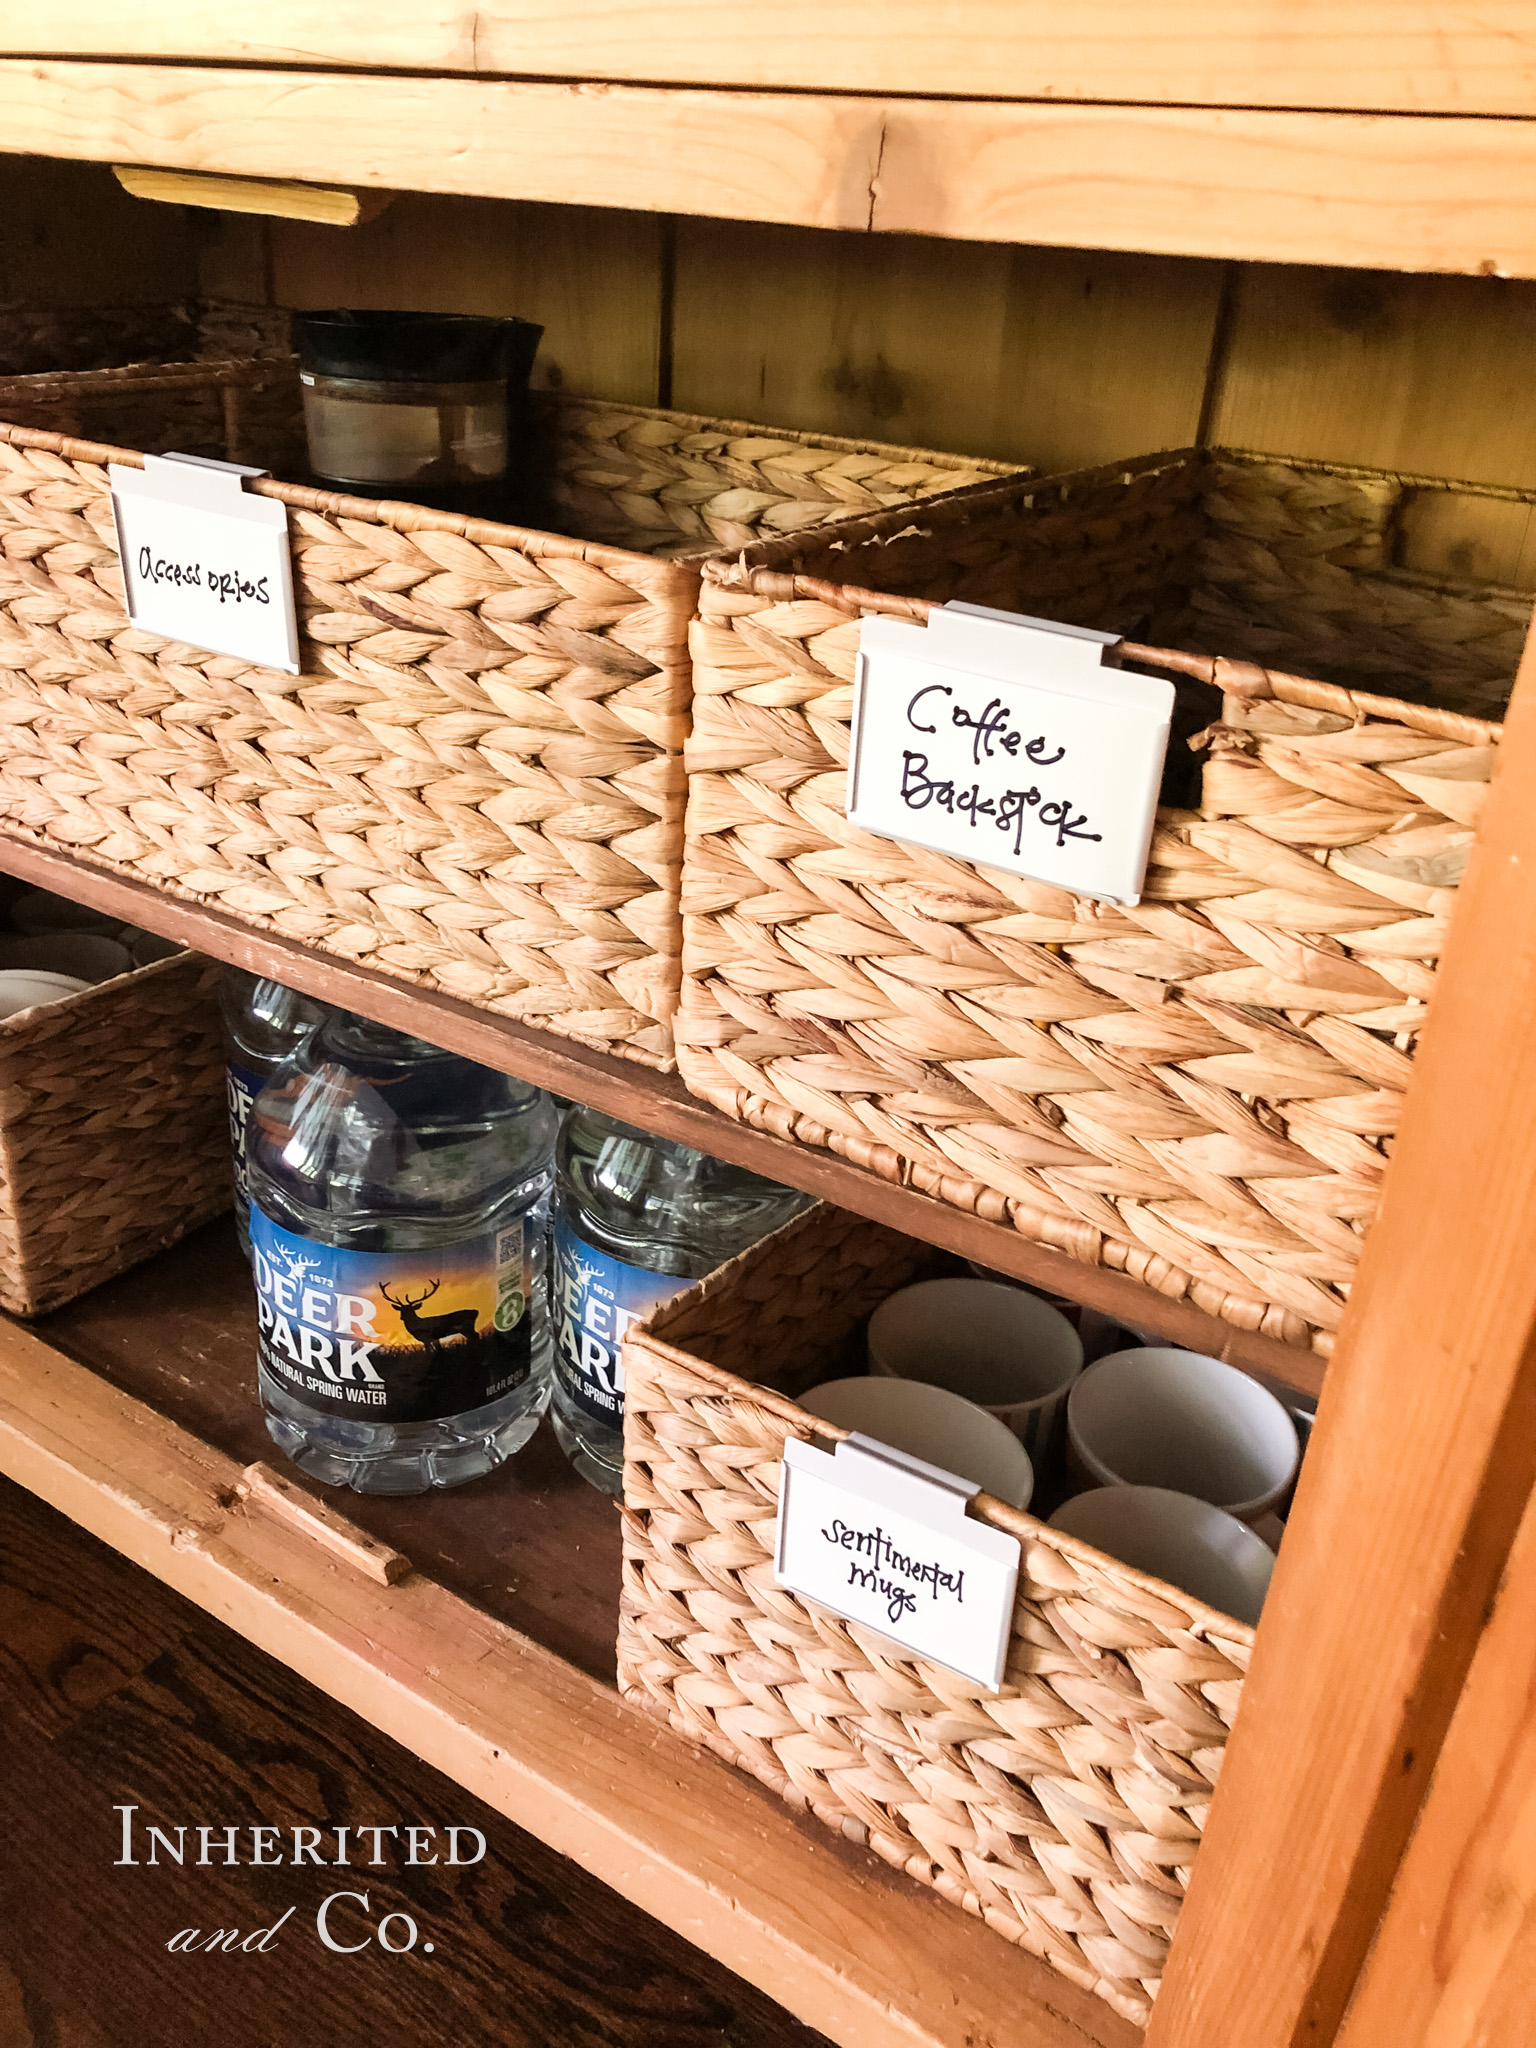 Baskets filled with coffee backstock and sentimental mugs in an antique cabinet home coffee bar